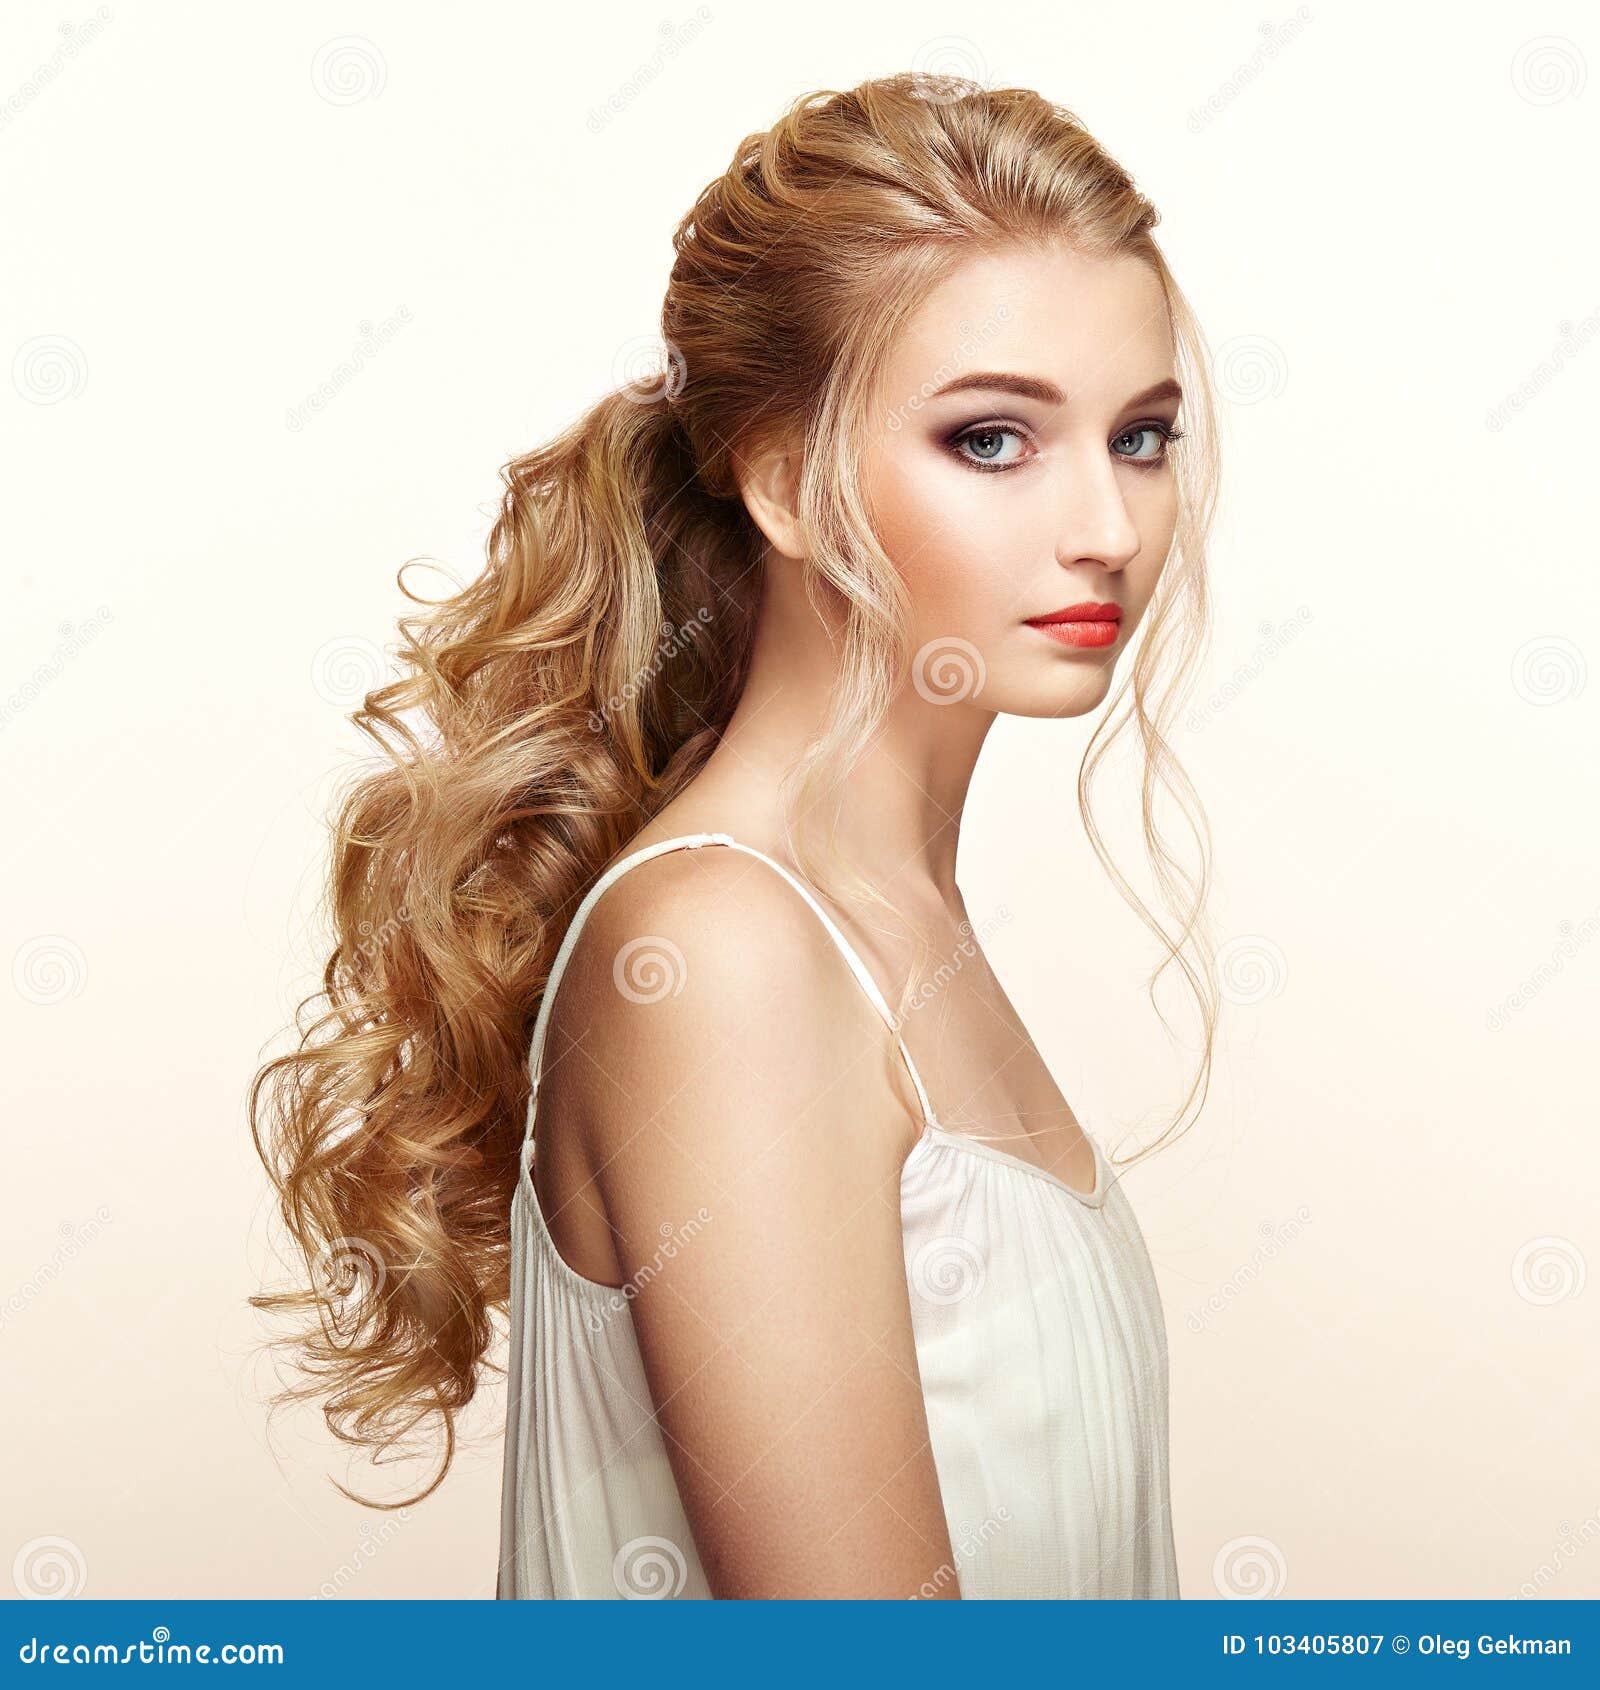 Blonde Girl with Long and Shiny Curly Hair Stock Image - Image of cosmetic,  eyelashes: 103405807